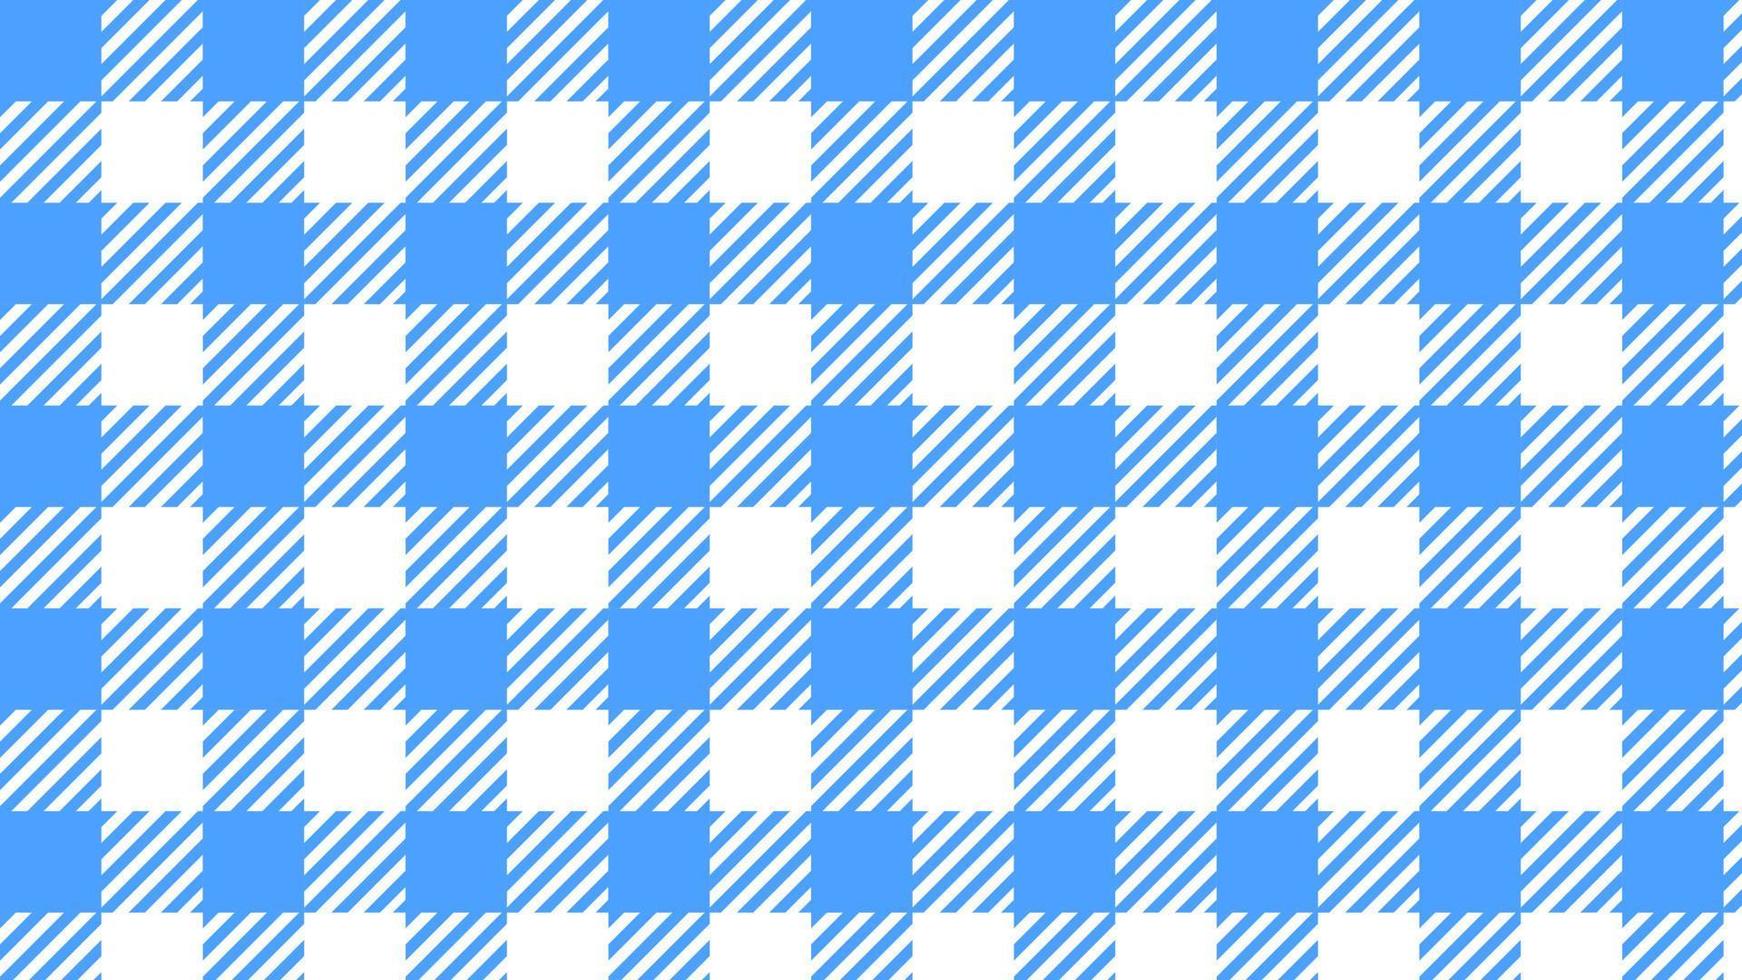 aesthetic blue tartan, gingham, plaid, checkers pattern wallpaper illustration, perfect for banner, wallpaper, backdrop, postcard, background for your design vector